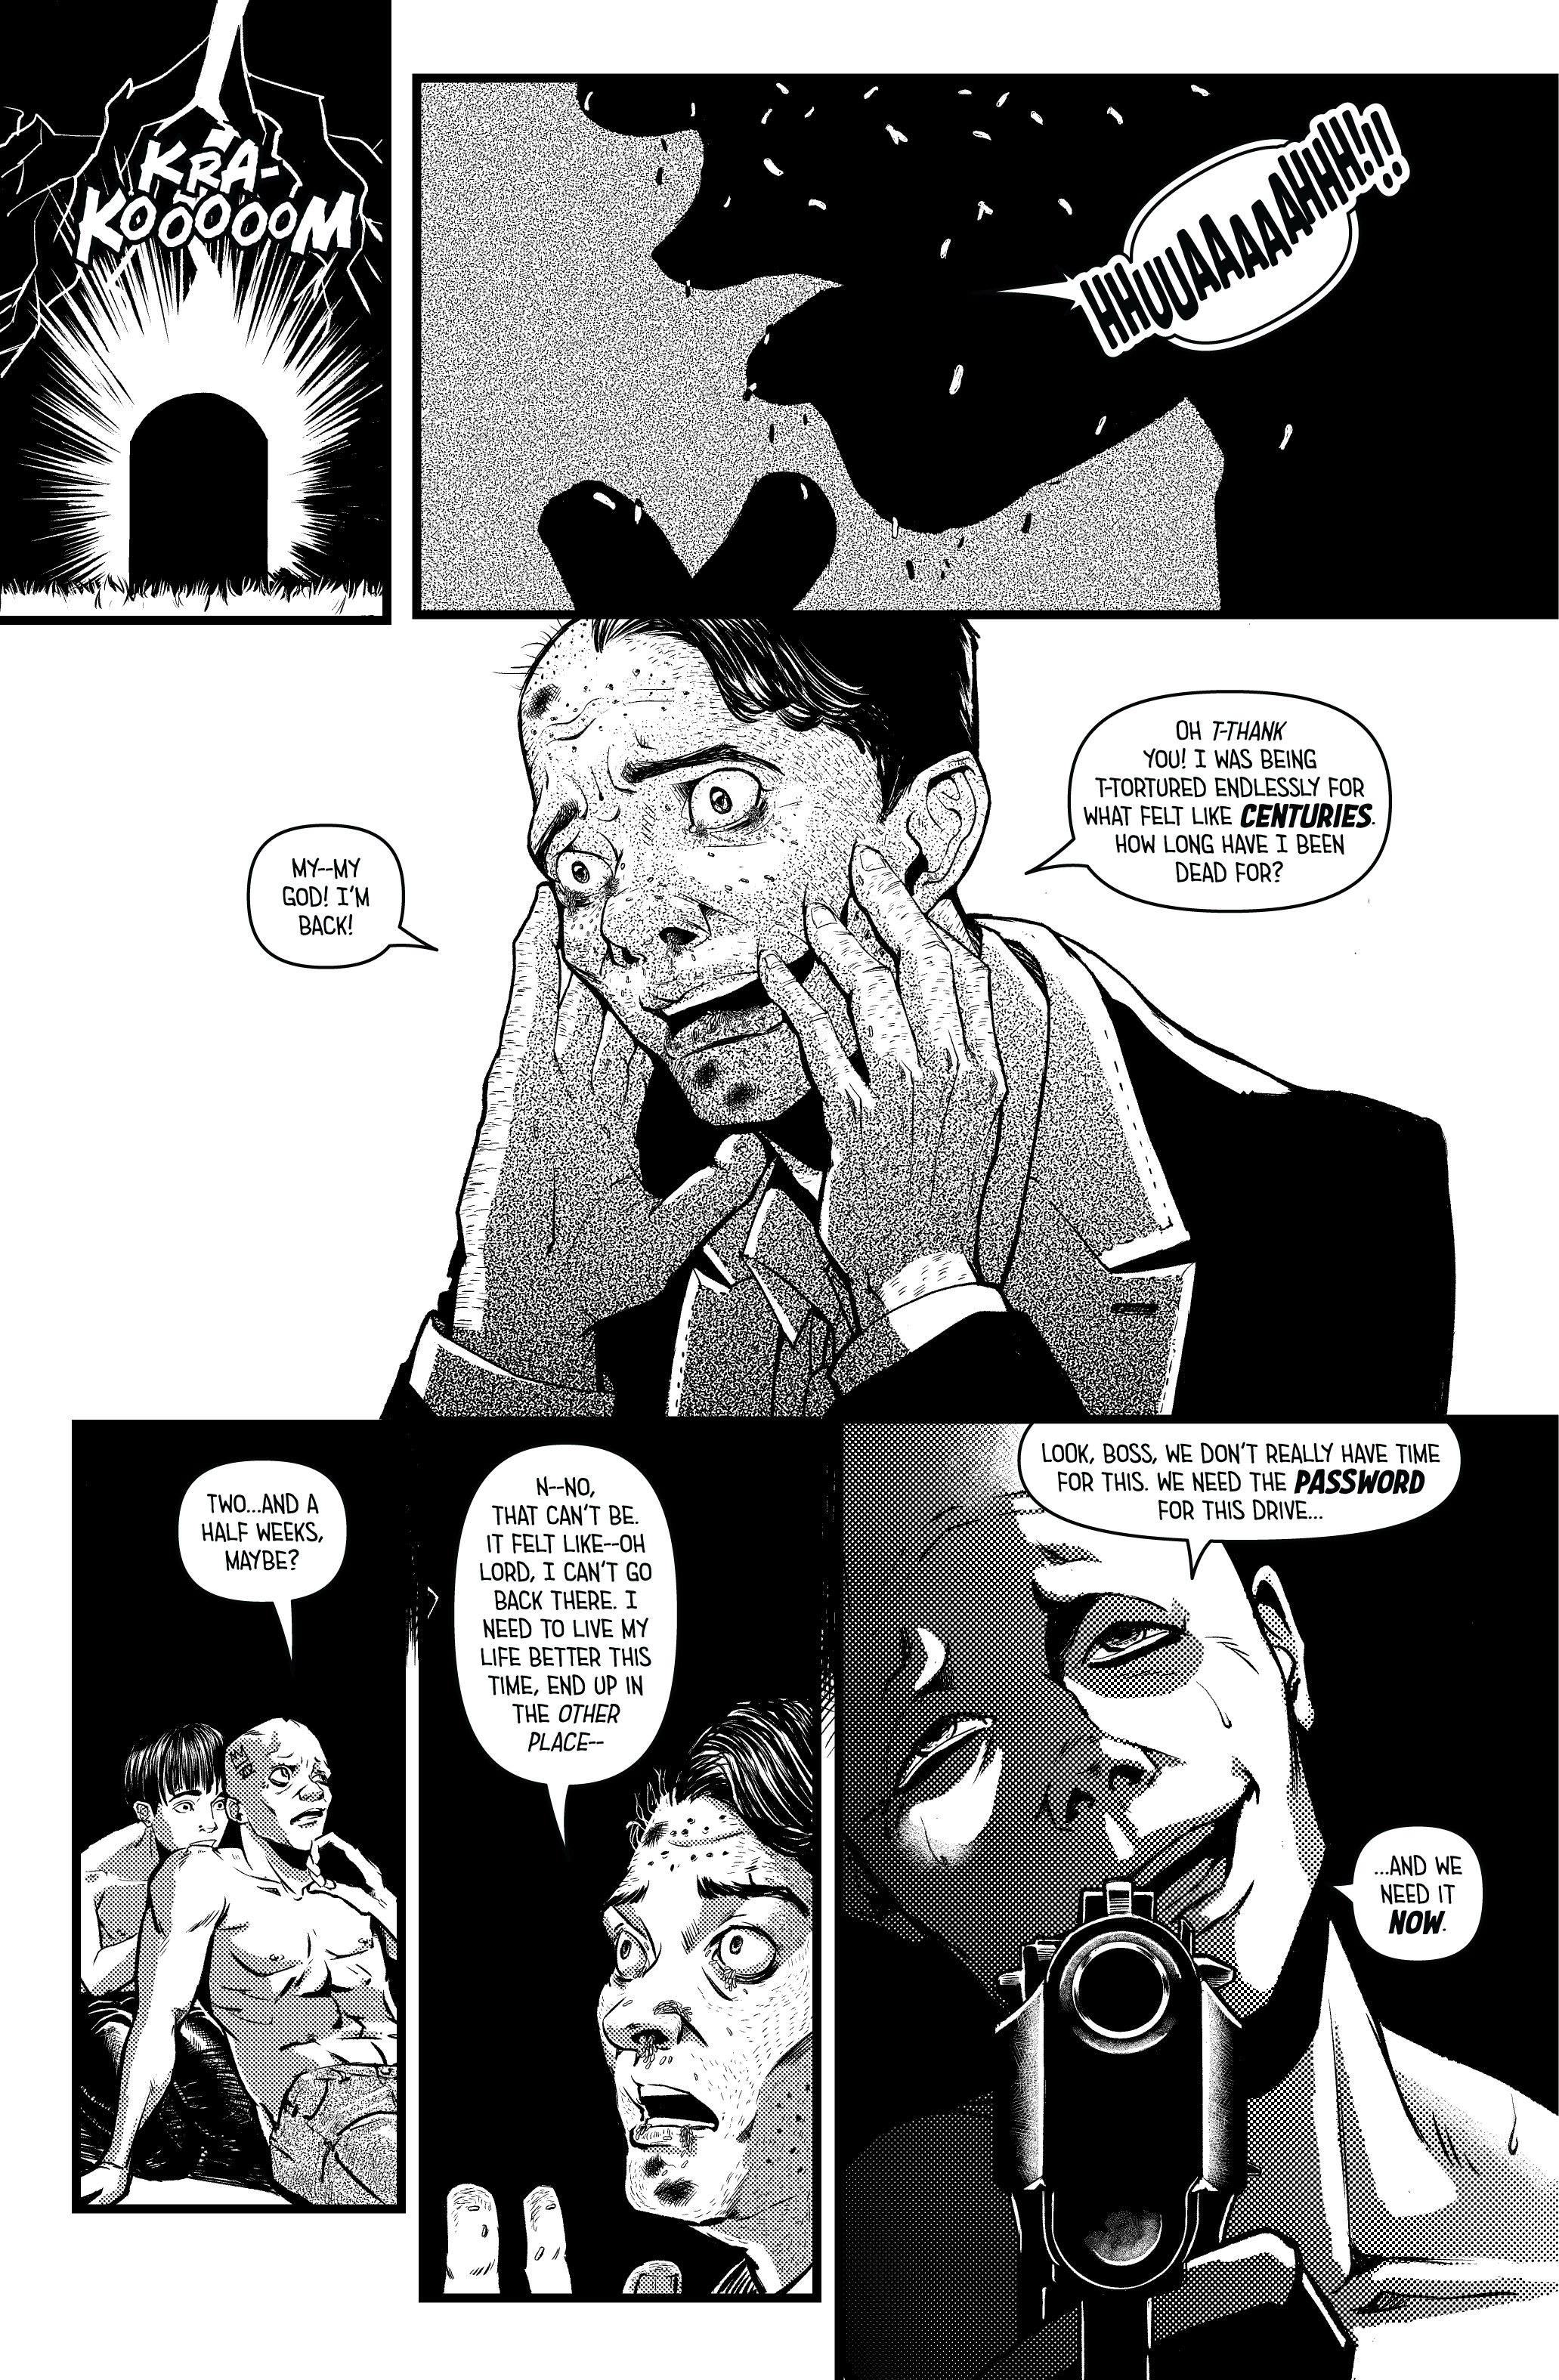 Monocul issue 07 story 01 pg 03 - Tales From The Crypto-01.png